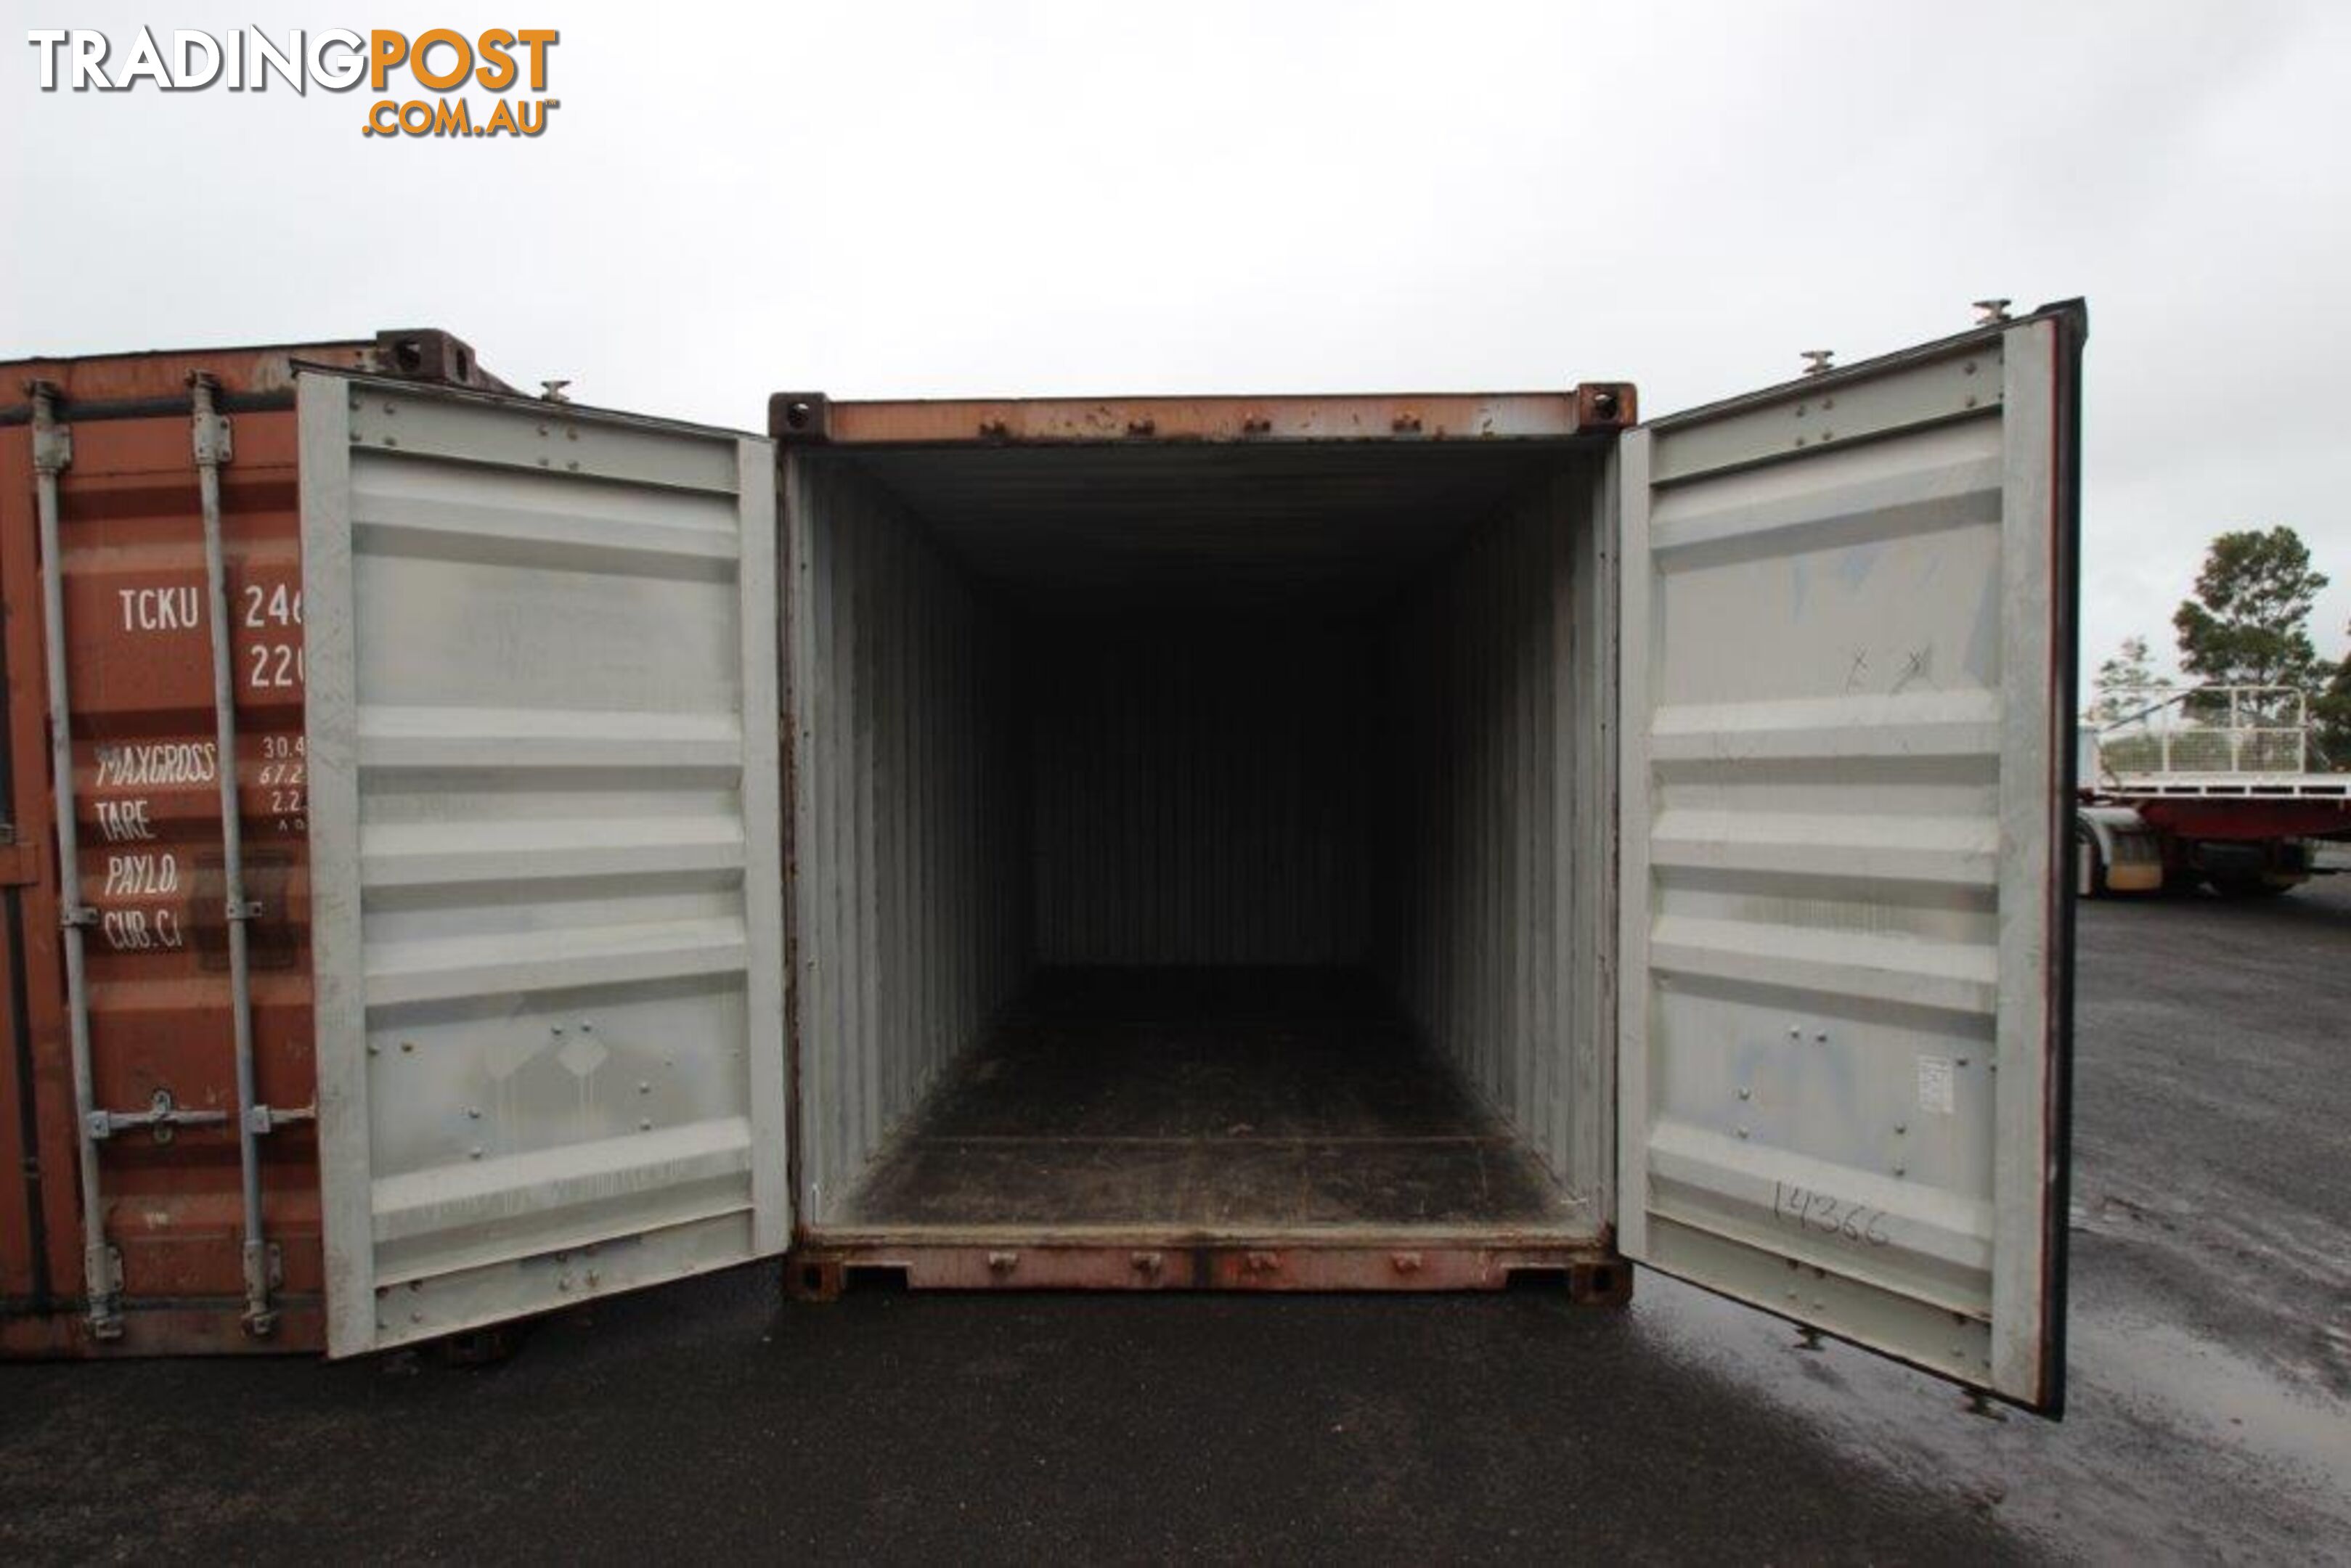 Used 20ft Shipping Containers Canberra - From $3650 + GST